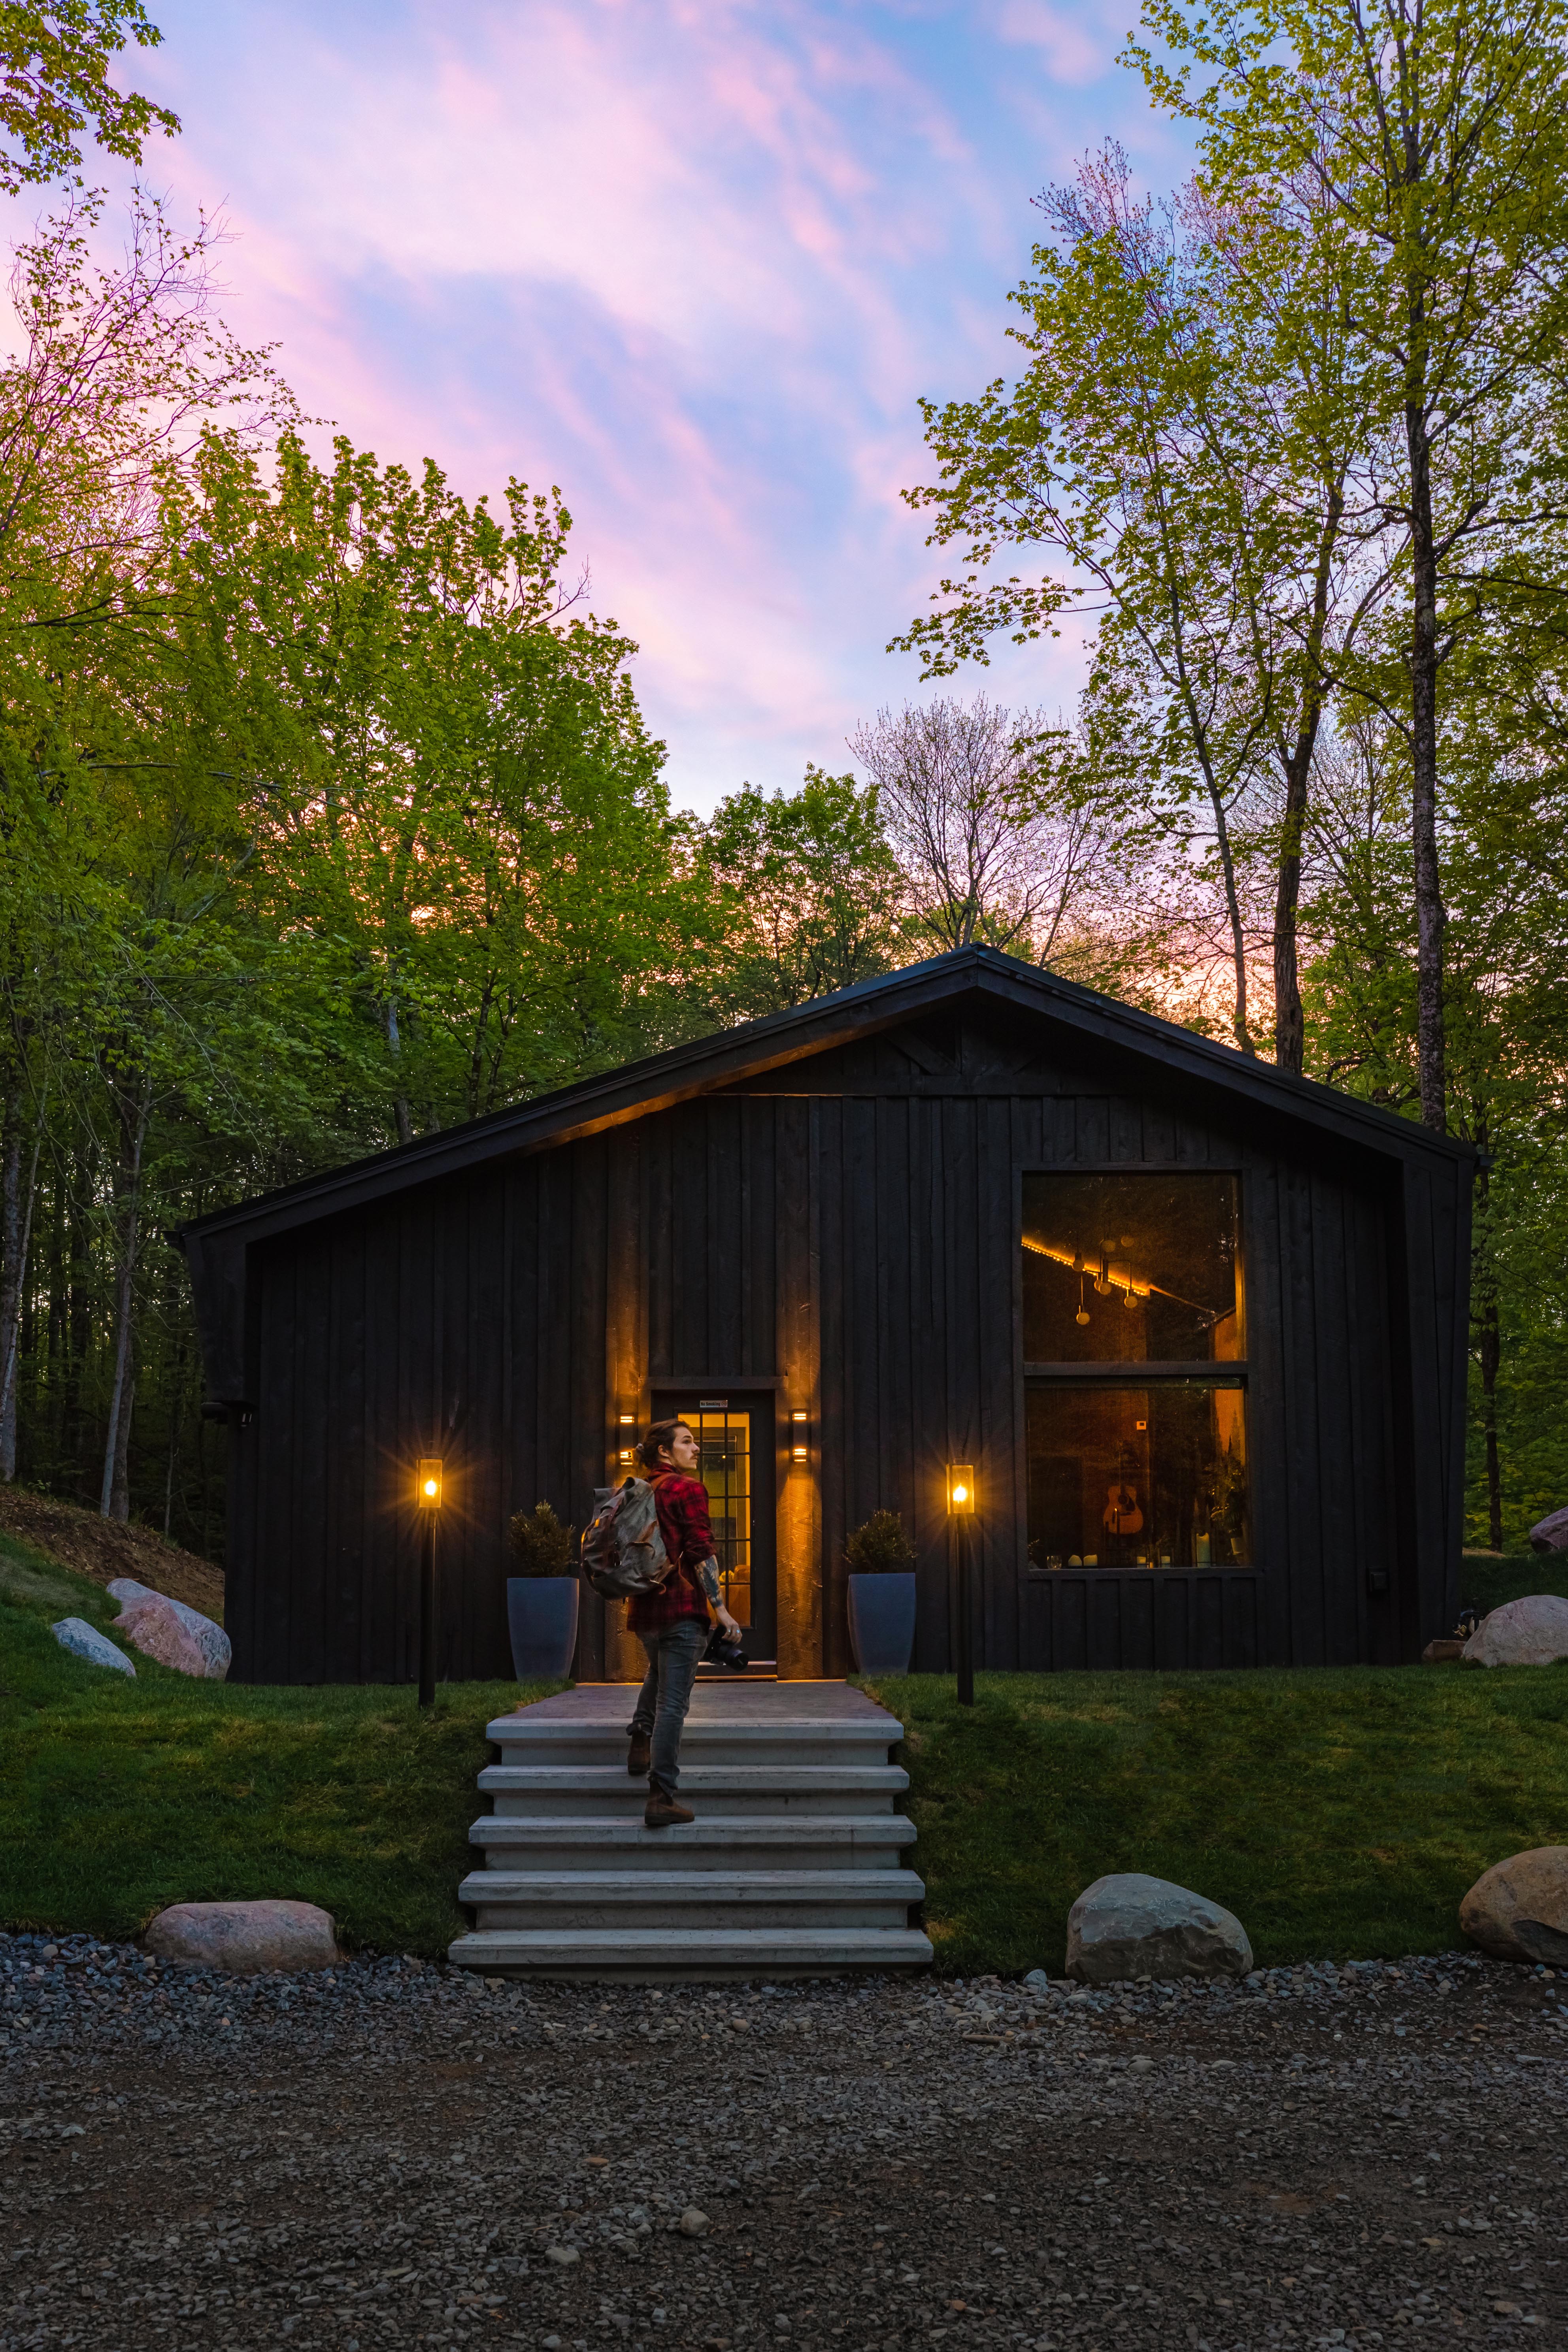 Designer Spa Cabin ~ Daily Massage ~ 18' Waterfall - Cabins for Rent in  Remsen, New York, United States - Airbnb